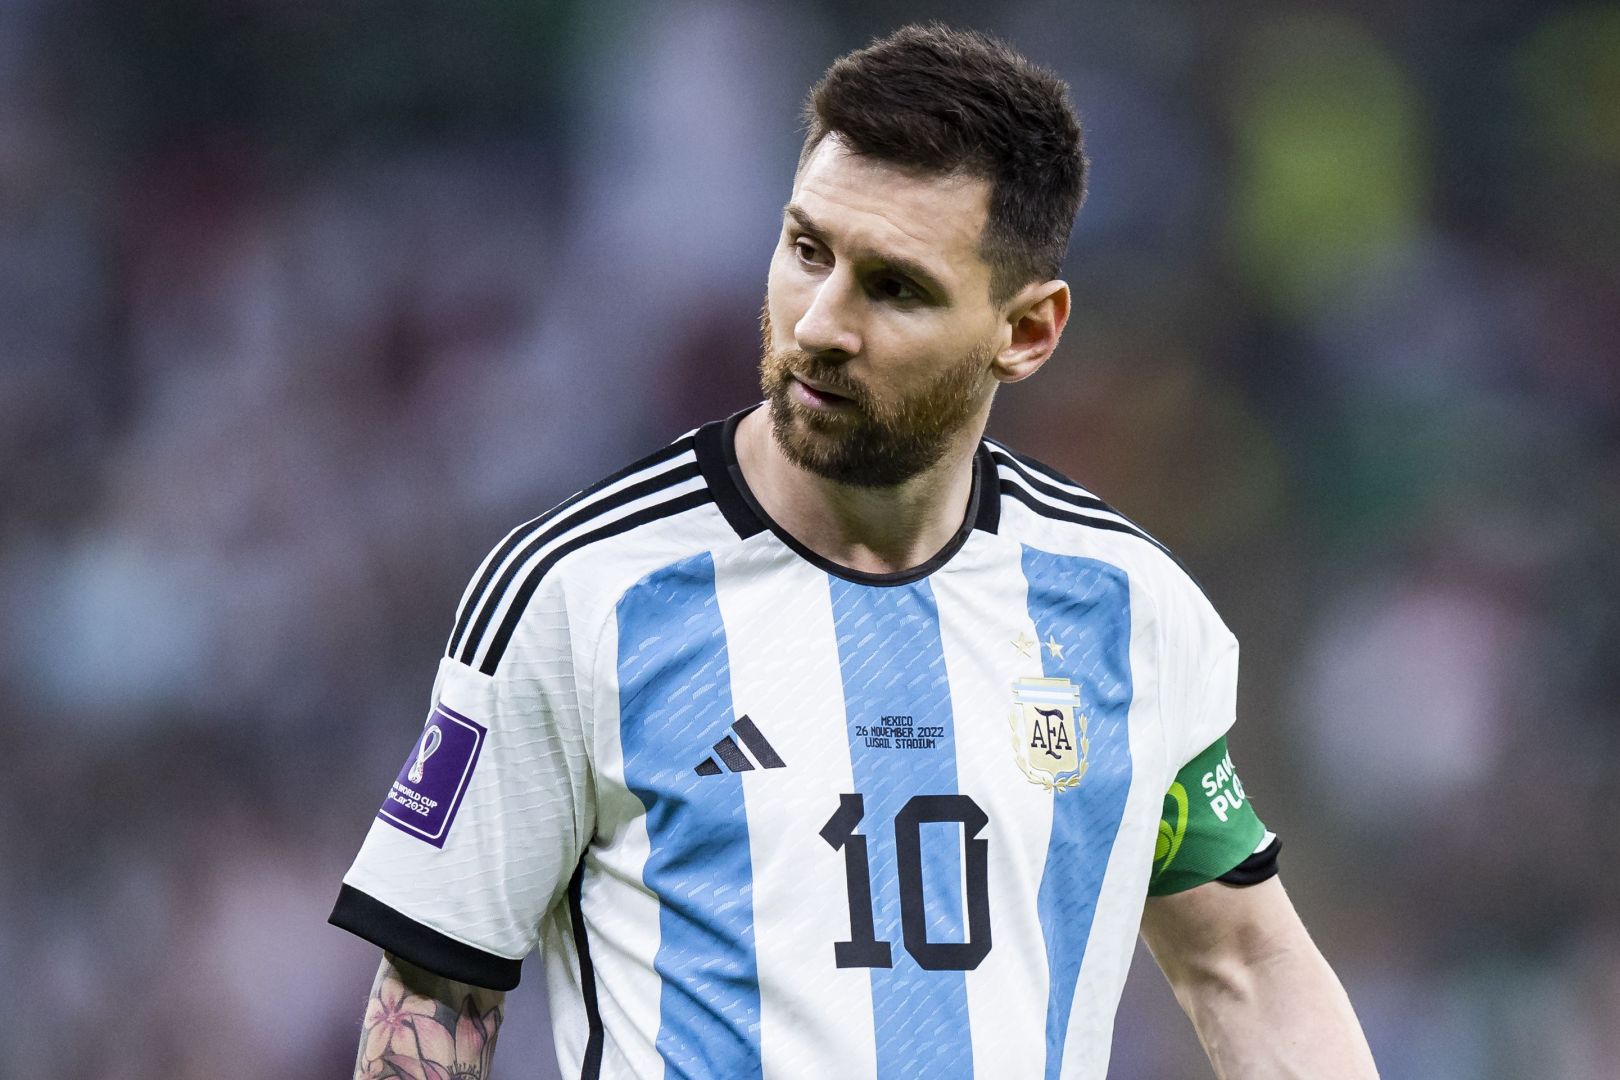 We should keep No.10 jersey prepared for next World Cup if Messi feels like  playing: Lionel Scaloni - India Today